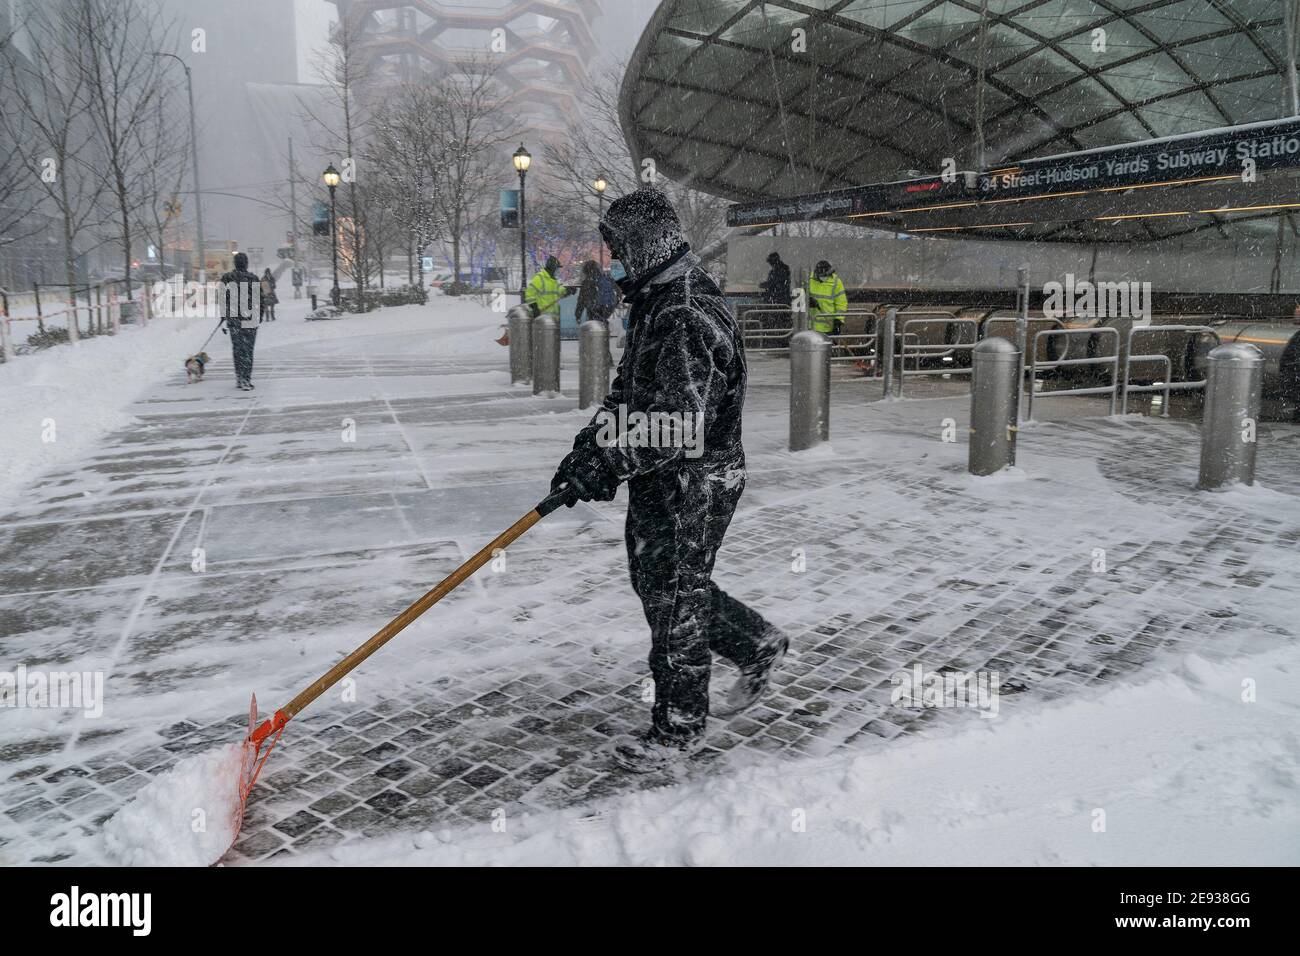 New York, United States. 01st Feb, 2021. Maintenance workers clear snow at Hudson Yards subway station entrance as major storm cover New York City with more than a foot expected on the ground. This snow storm called nor'easter storm. Heavy snowfall expected to continue for more than 24 hours. Snow storm impacted all North East of the US. (Photo by Lev Radin/Pacific Press) Credit: Pacific Press Media Production Corp./Alamy Live News Stock Photo